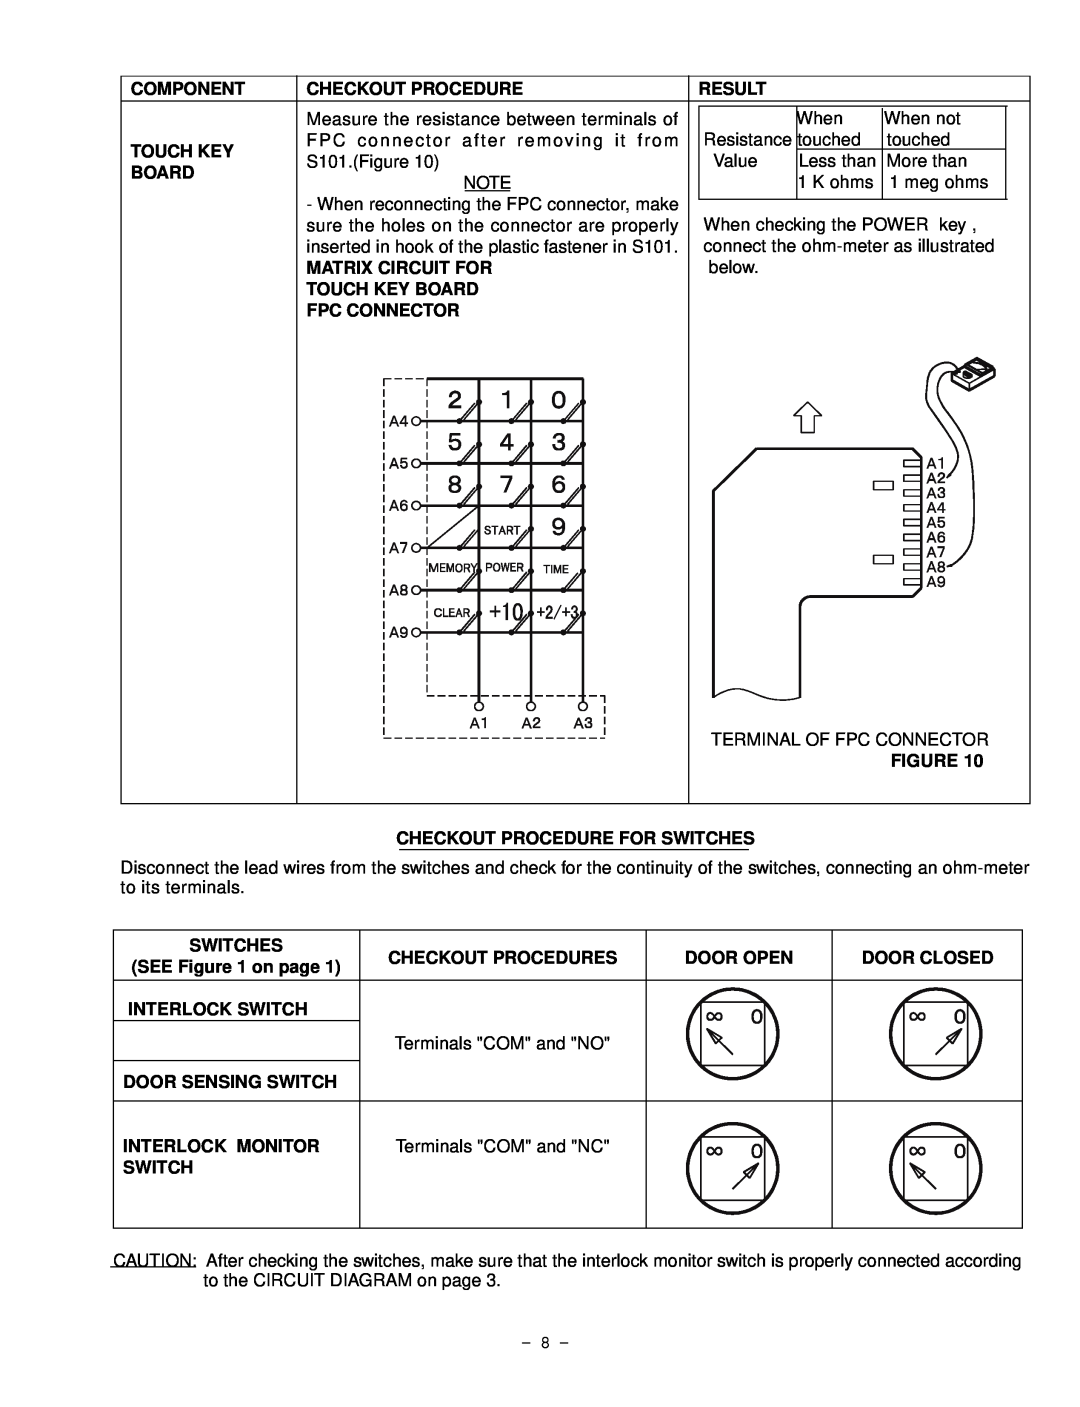 Garland EM-C180 Component, Checkout Procedure, Result, Matrix Circuit For, Touch Key Board, Fpc Connector, Switch 